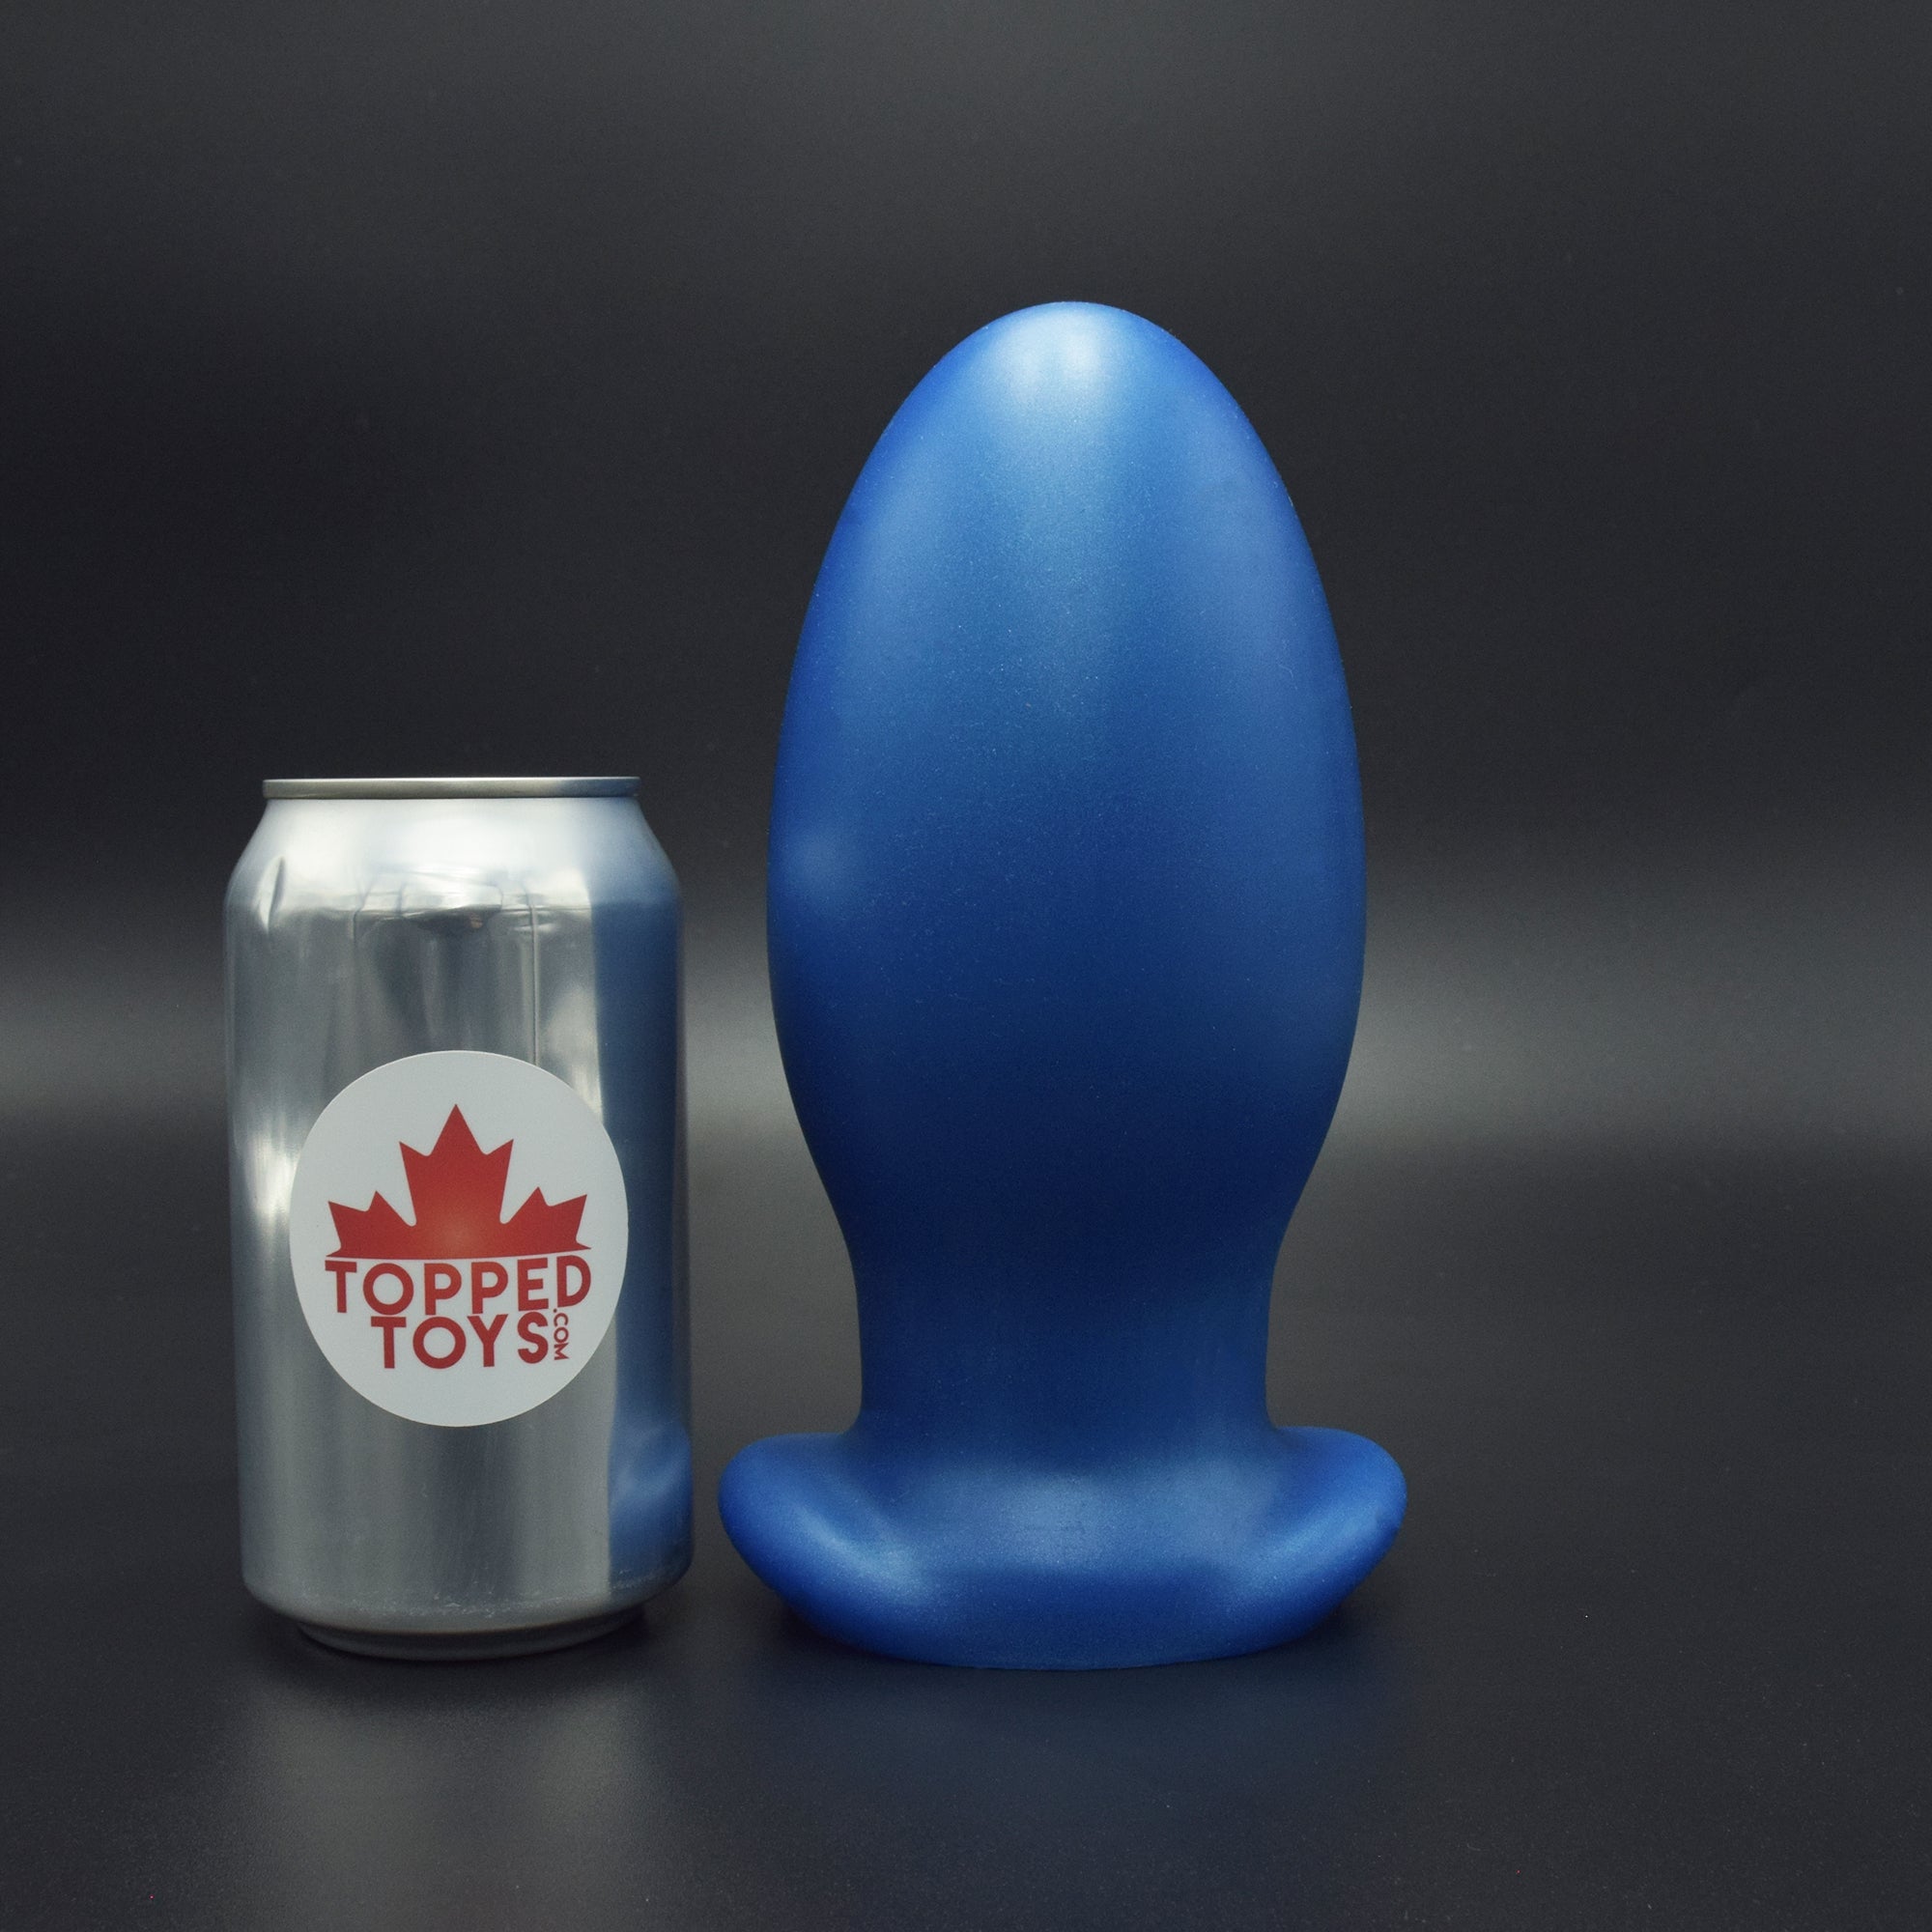 Gape Keeper 108 in Blue Steel standing up, next to pop can with Topped Toys logo